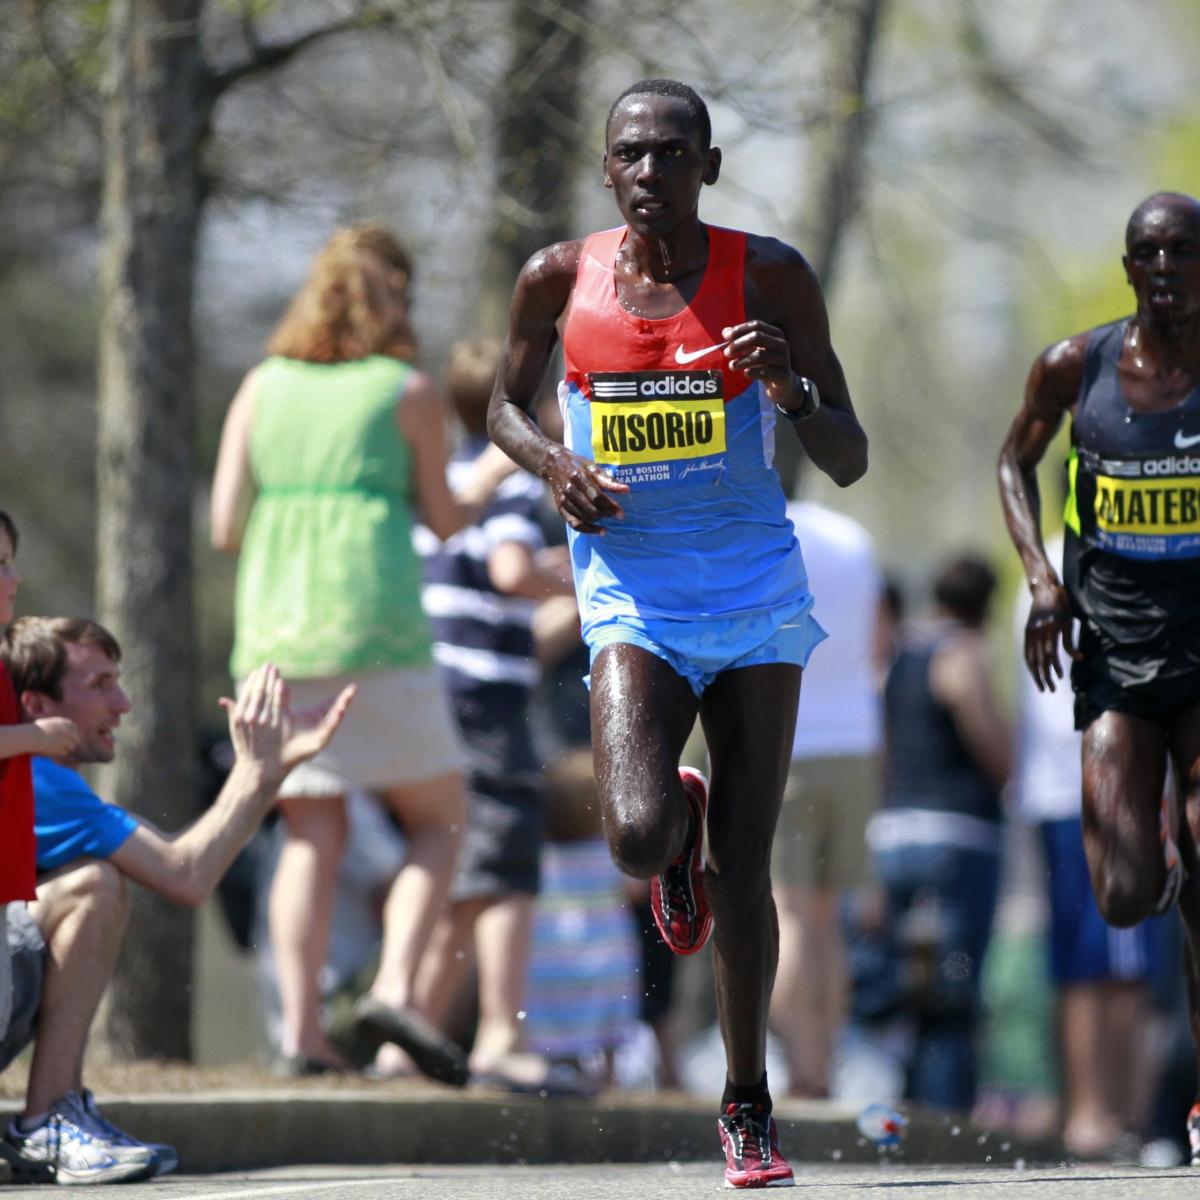 Amsterdam Marathon 2013 Results: Men's and Women's Top Finishers | News ...